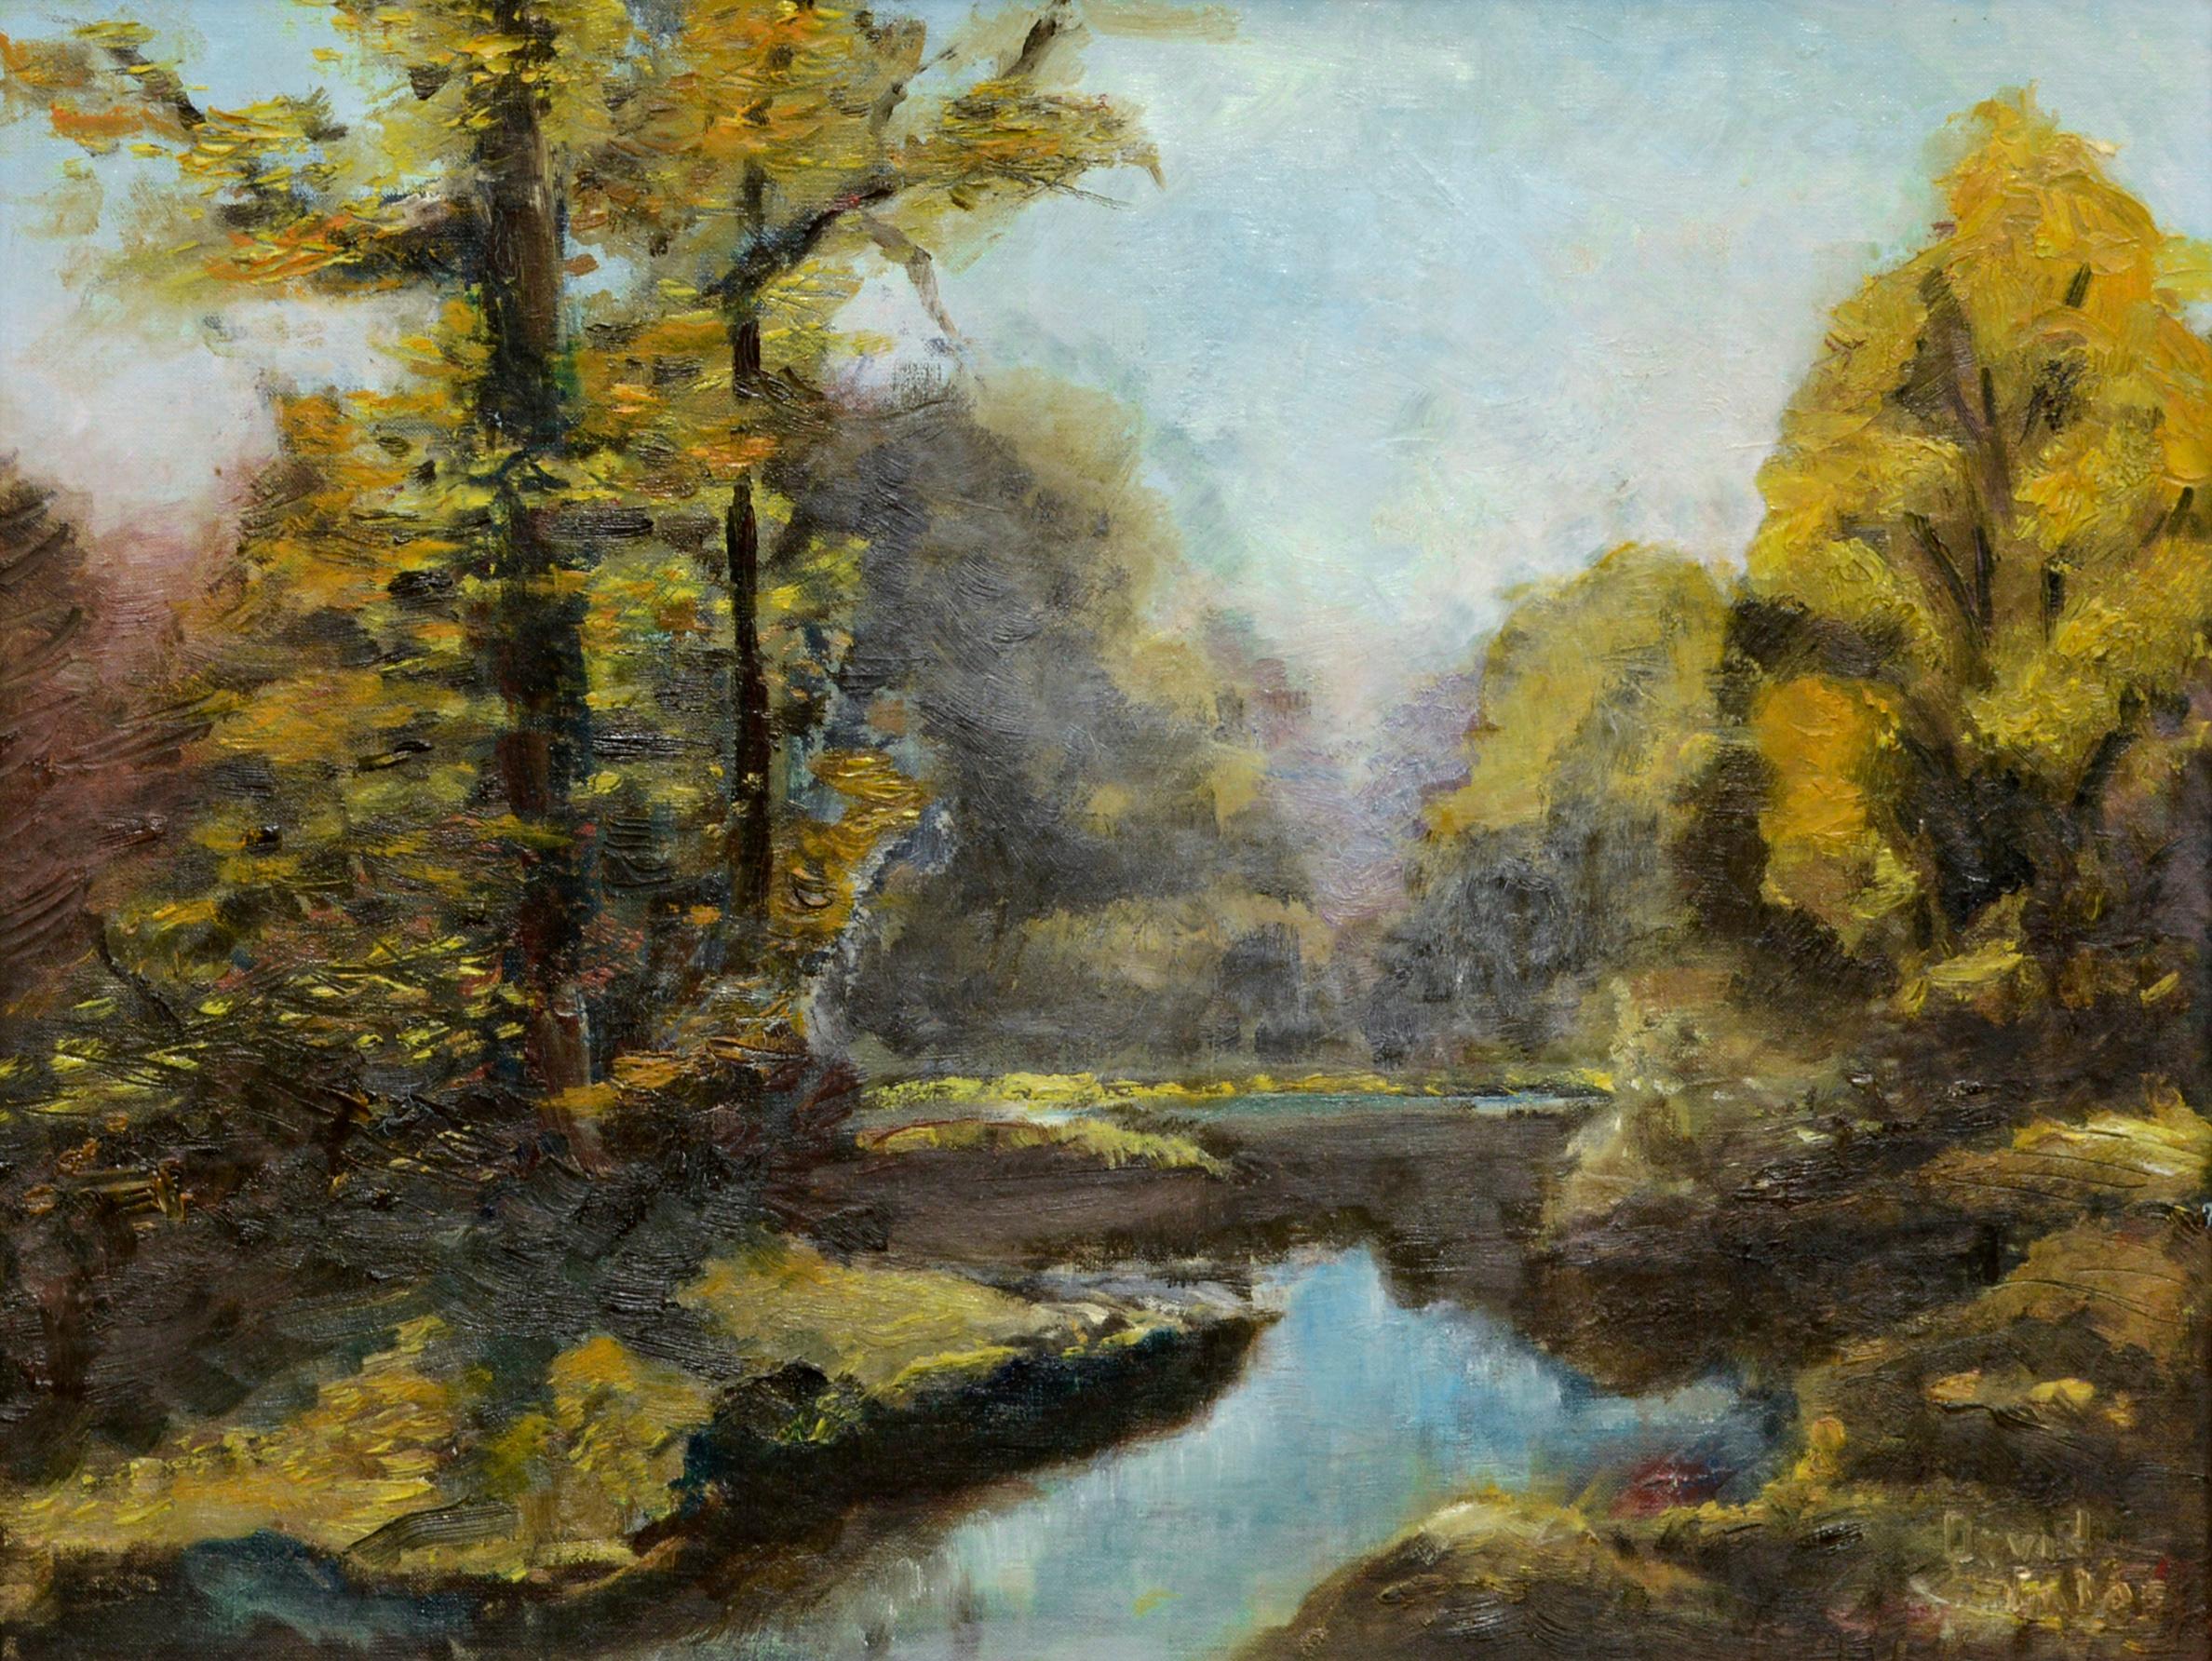 Autumn Mist Over the Pond - Painting by David Galas